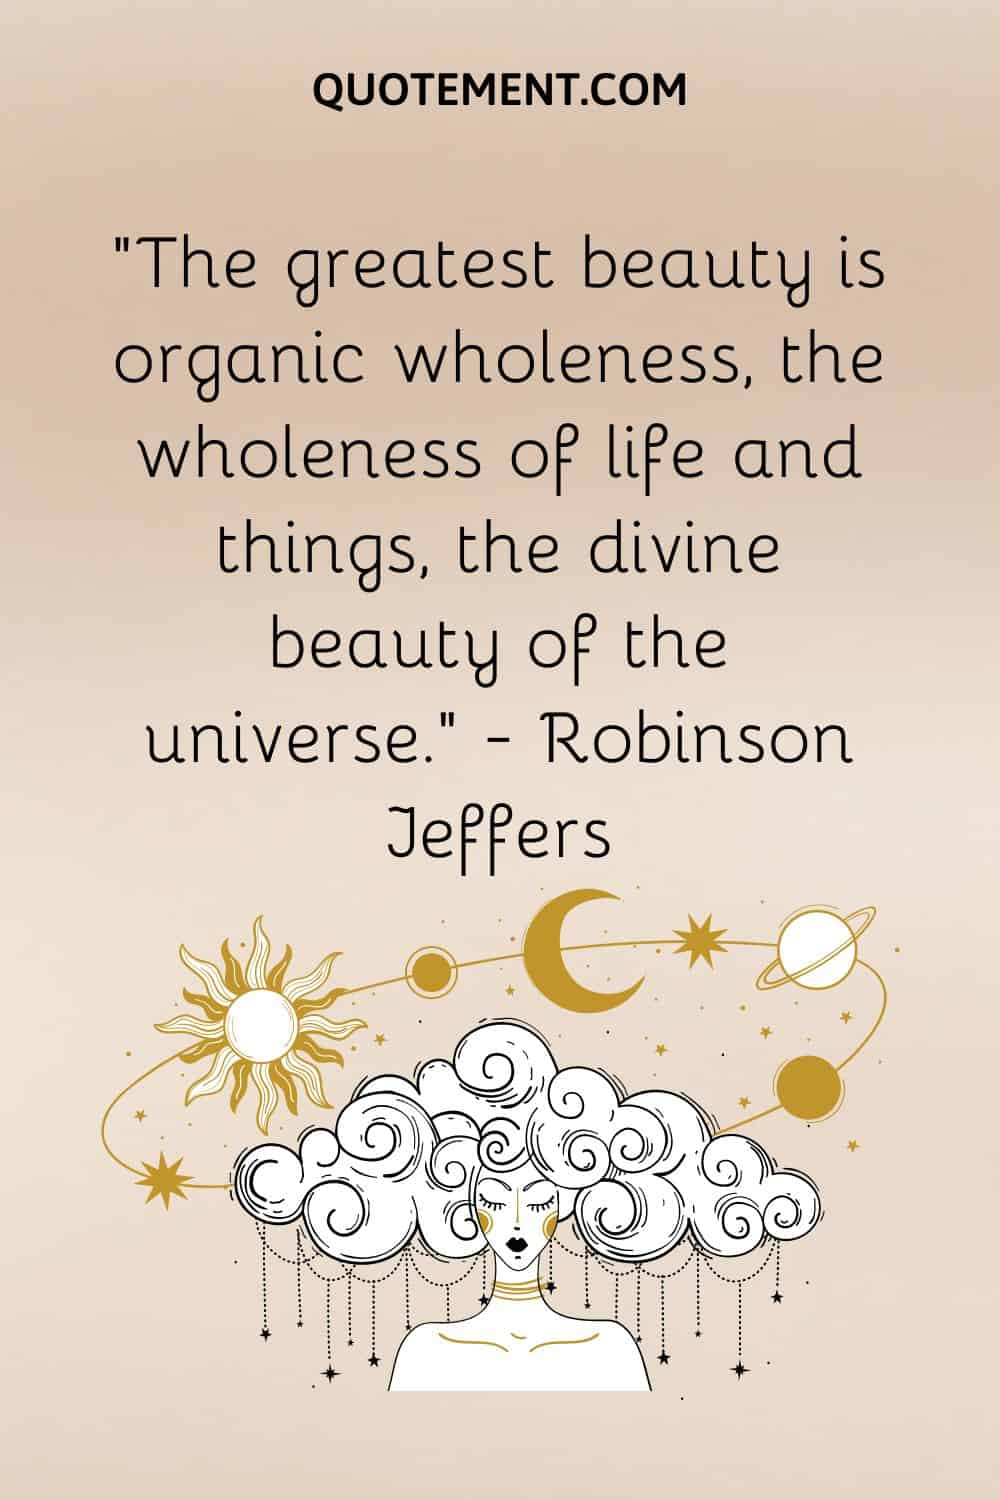 The greatest beauty is organic wholeness, the wholeness of life and things, the divine beauty of the universe